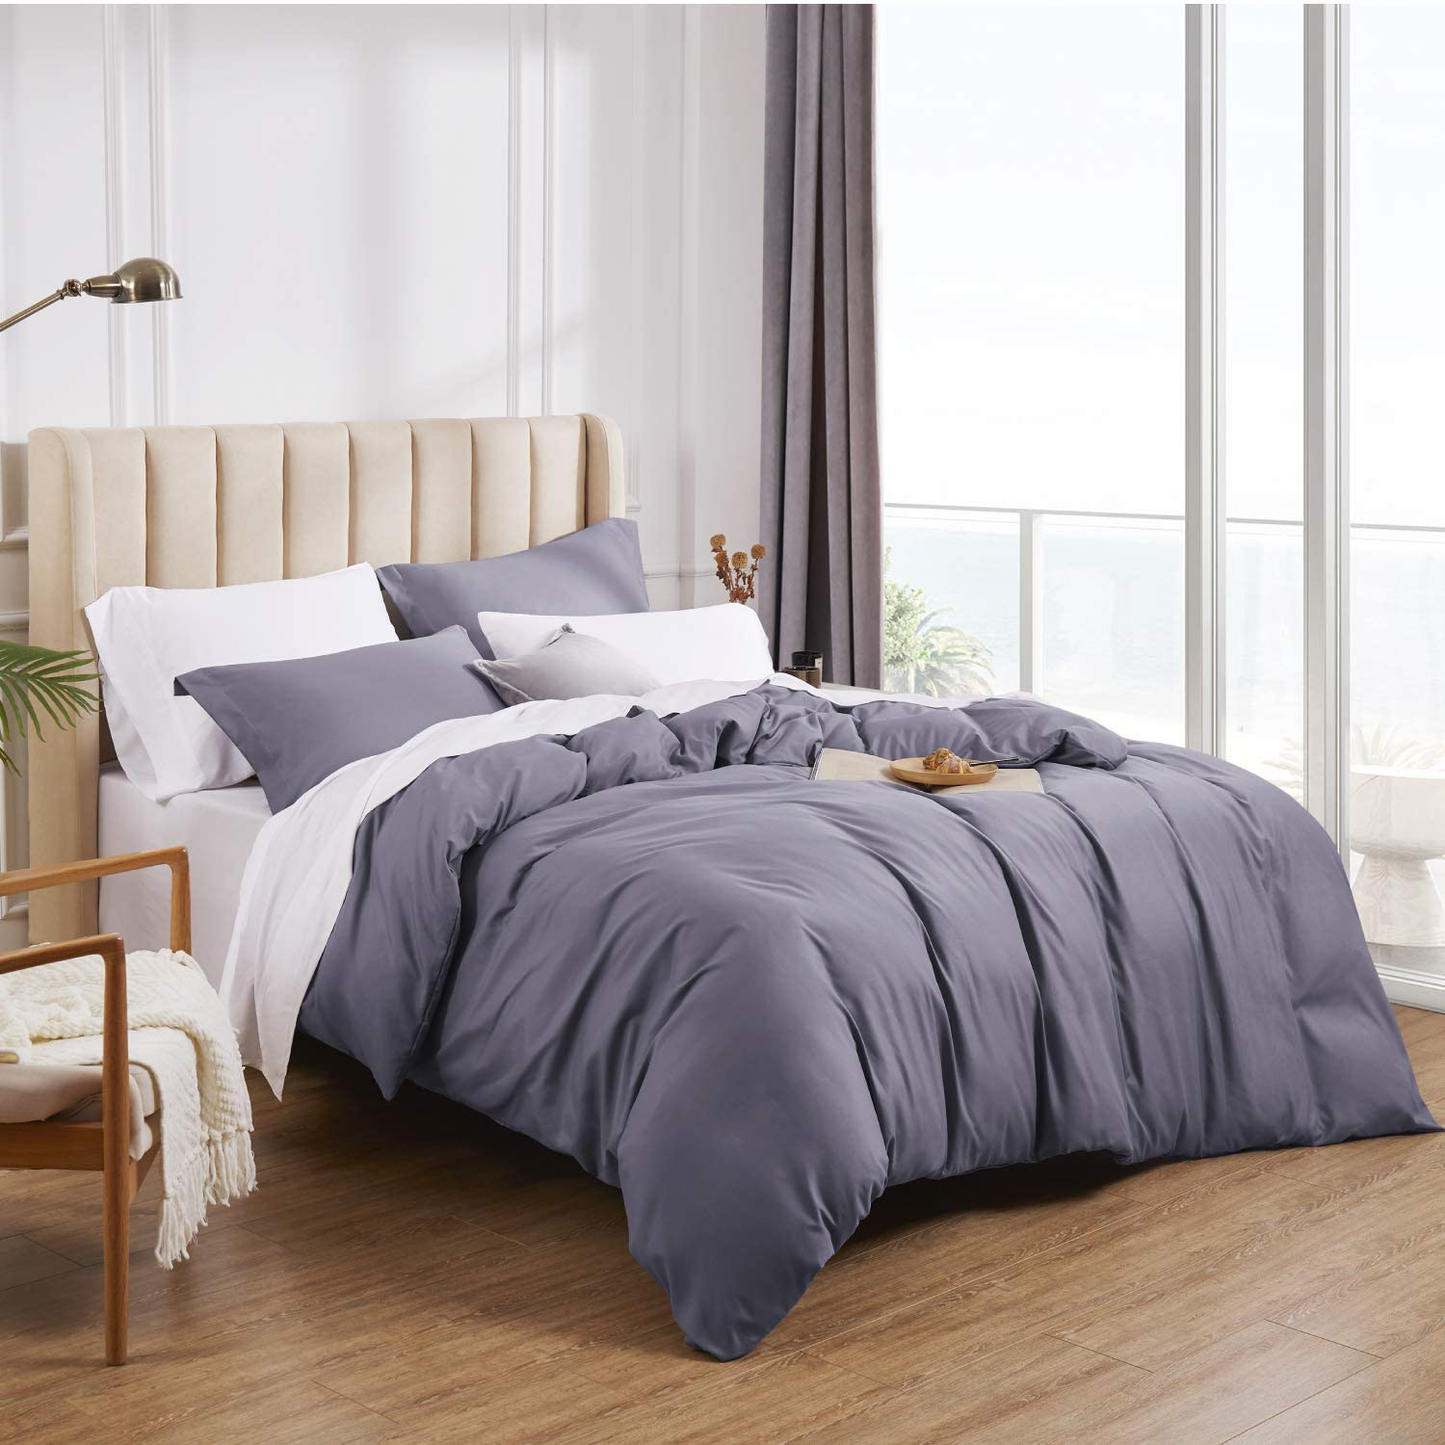 Bedsure Purple Duvet Cover King Size - Brushed Microfiber Soft King Duvet Cover Set 3 Pieces with Zipper Closure, 1 Duvet Cover 104x90 inches and 2 Pillow Shams